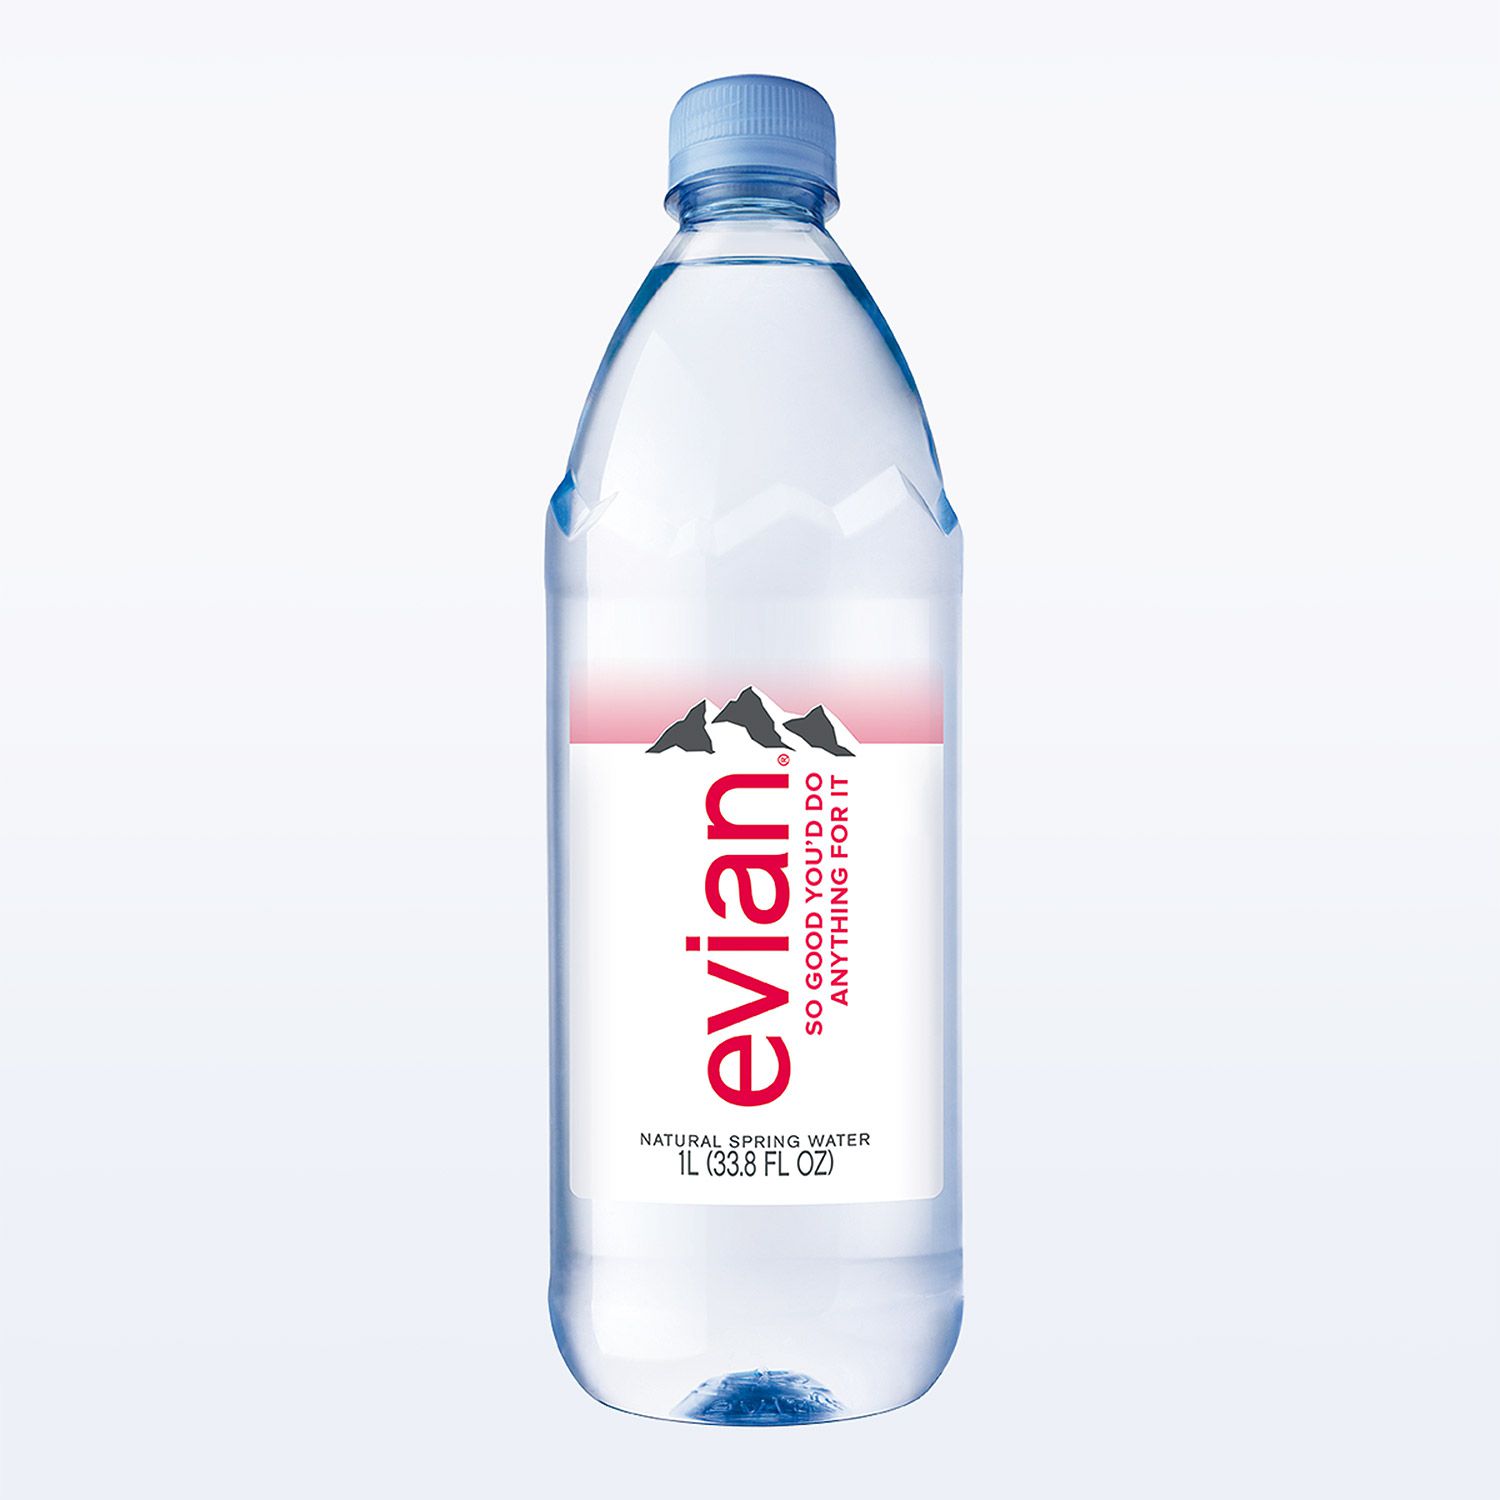 Andy King, Evian water